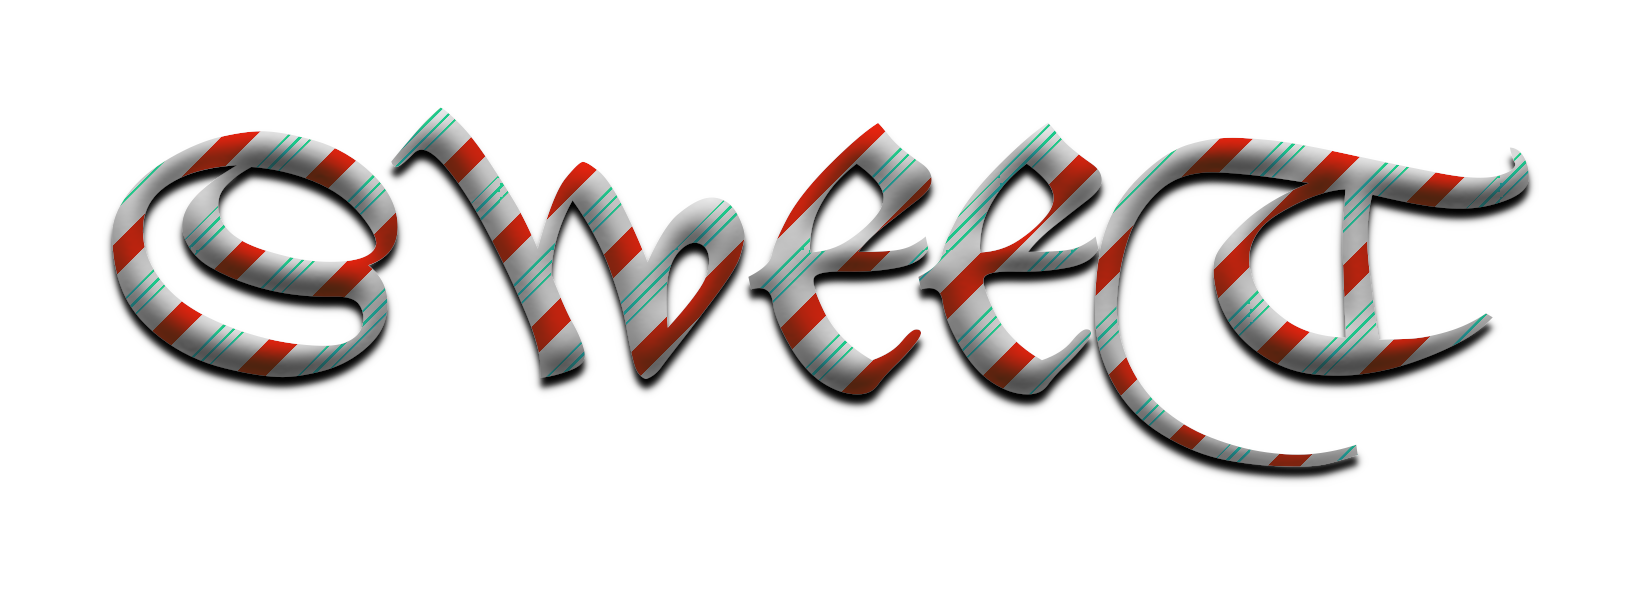 Candy-Cane-Test_Christmas_RD.png